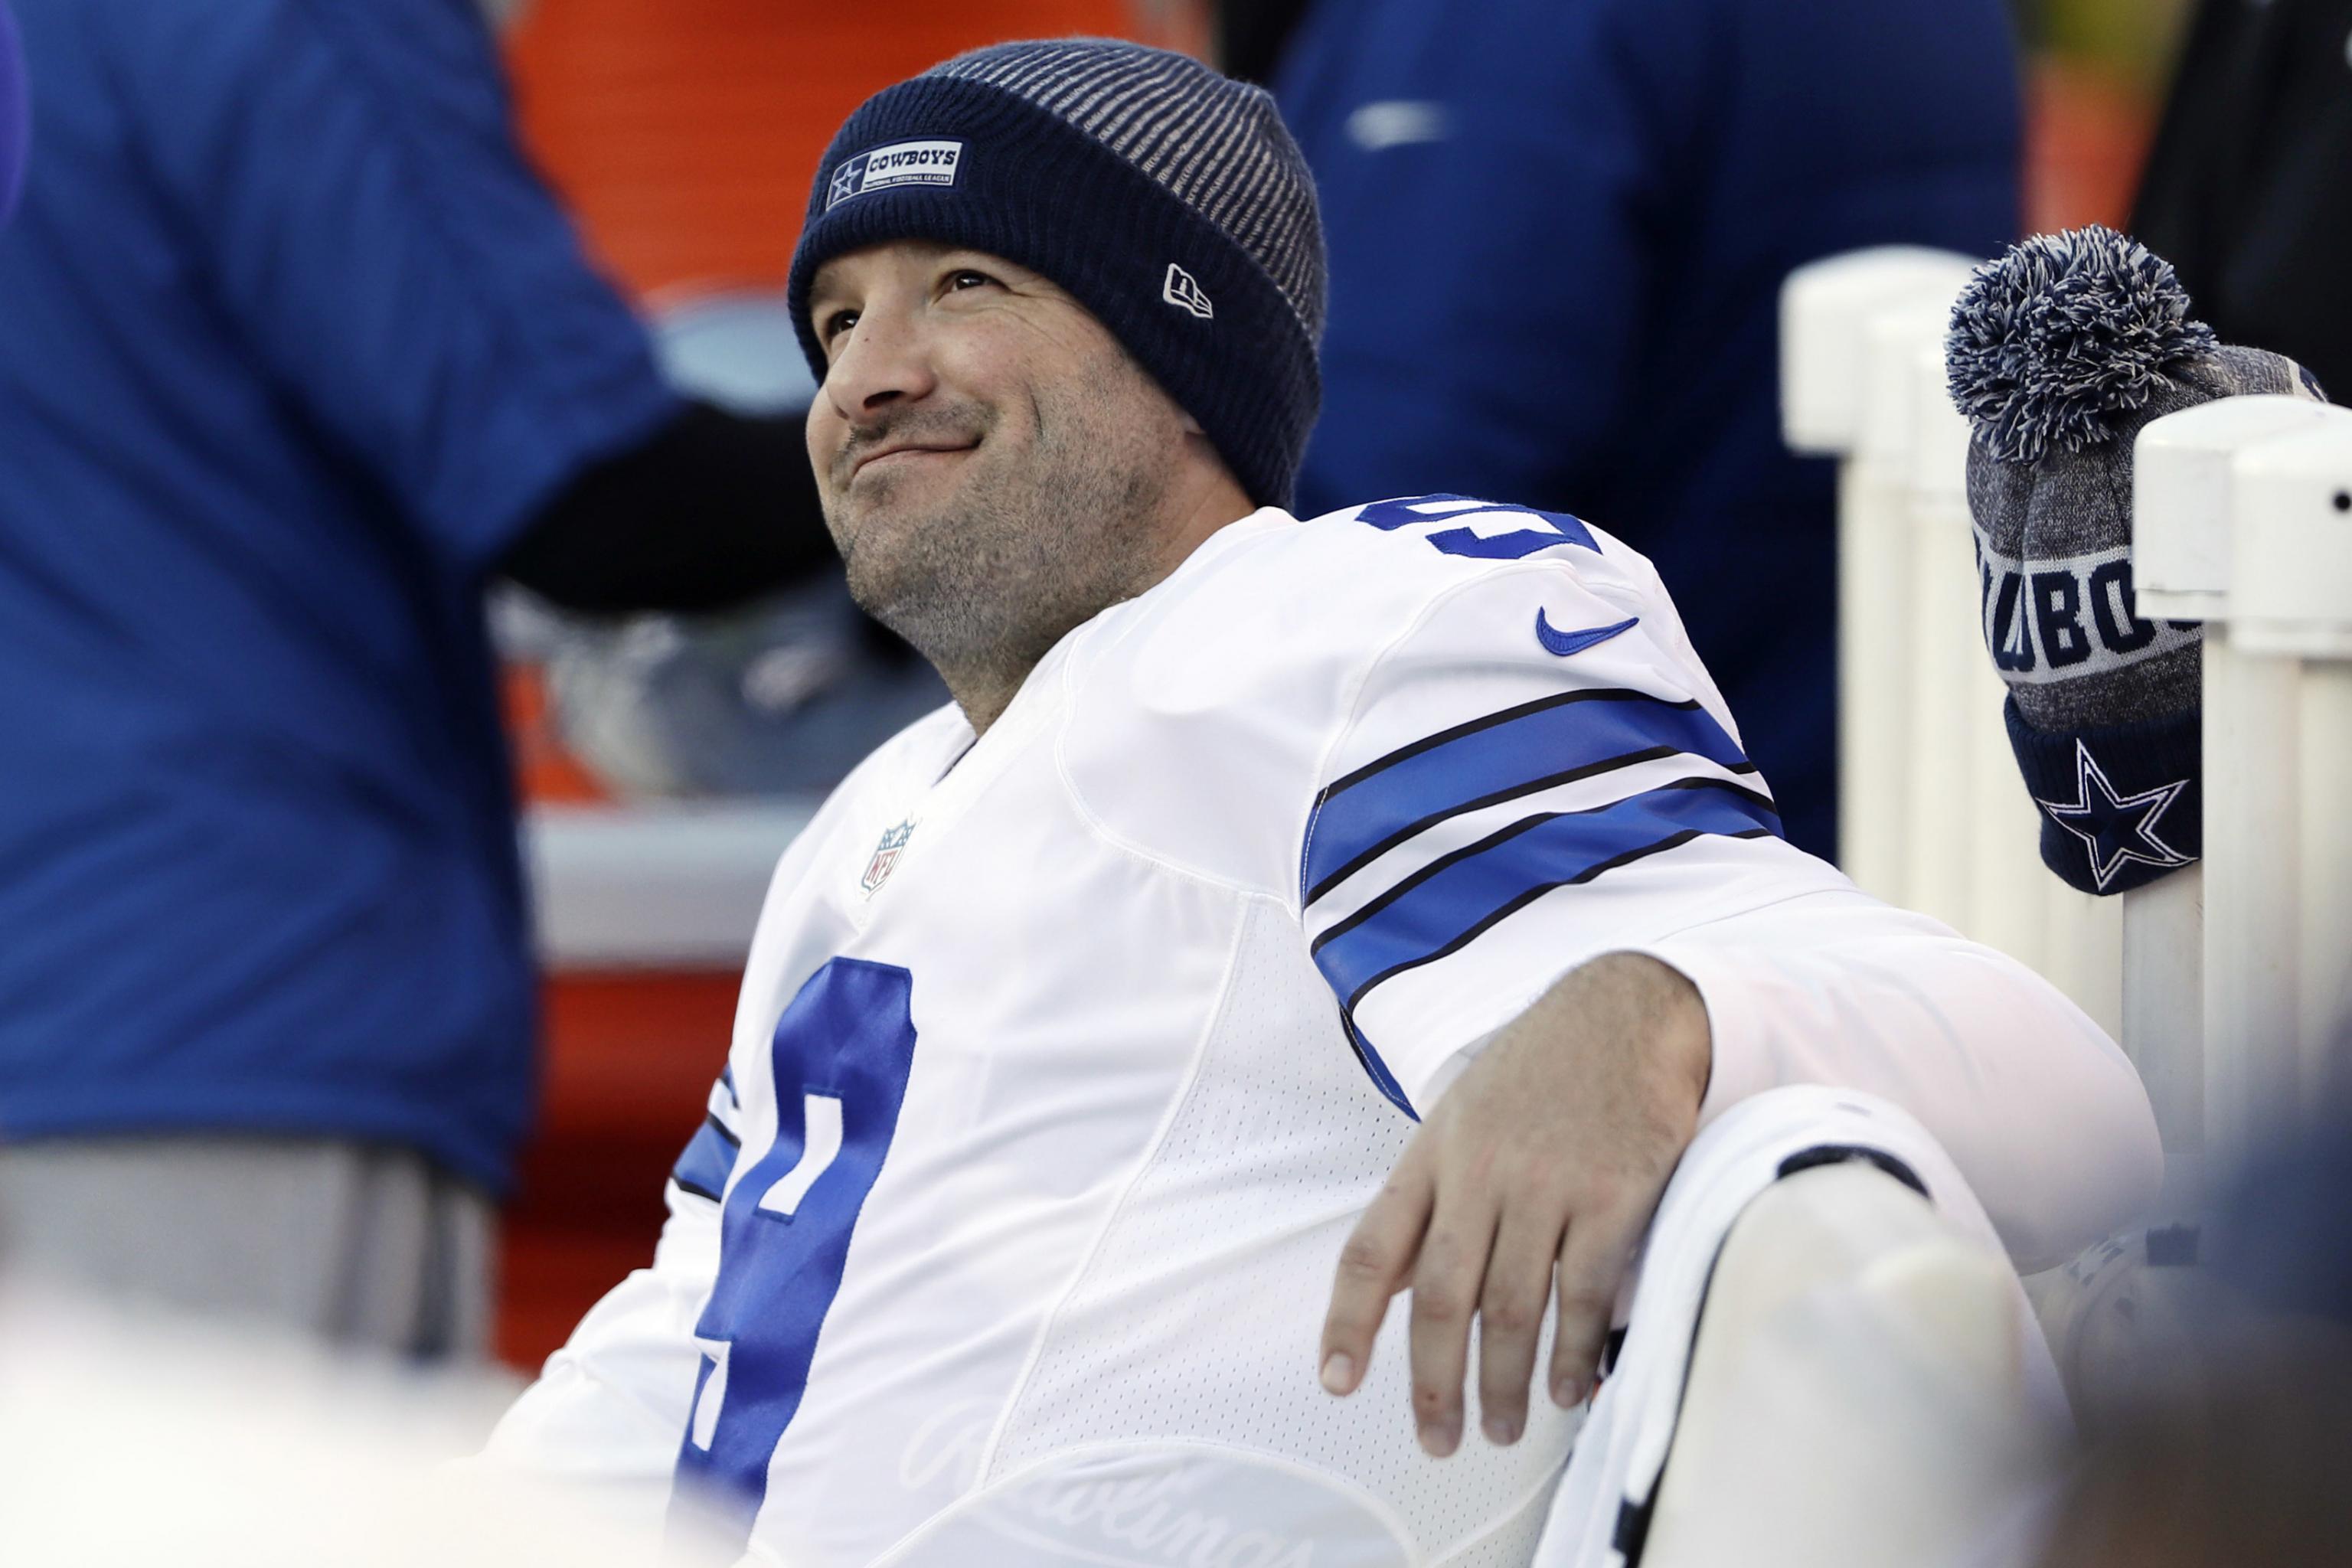 Tony Romo's 3 Kids: All About Hawkins, Rivers and Jones